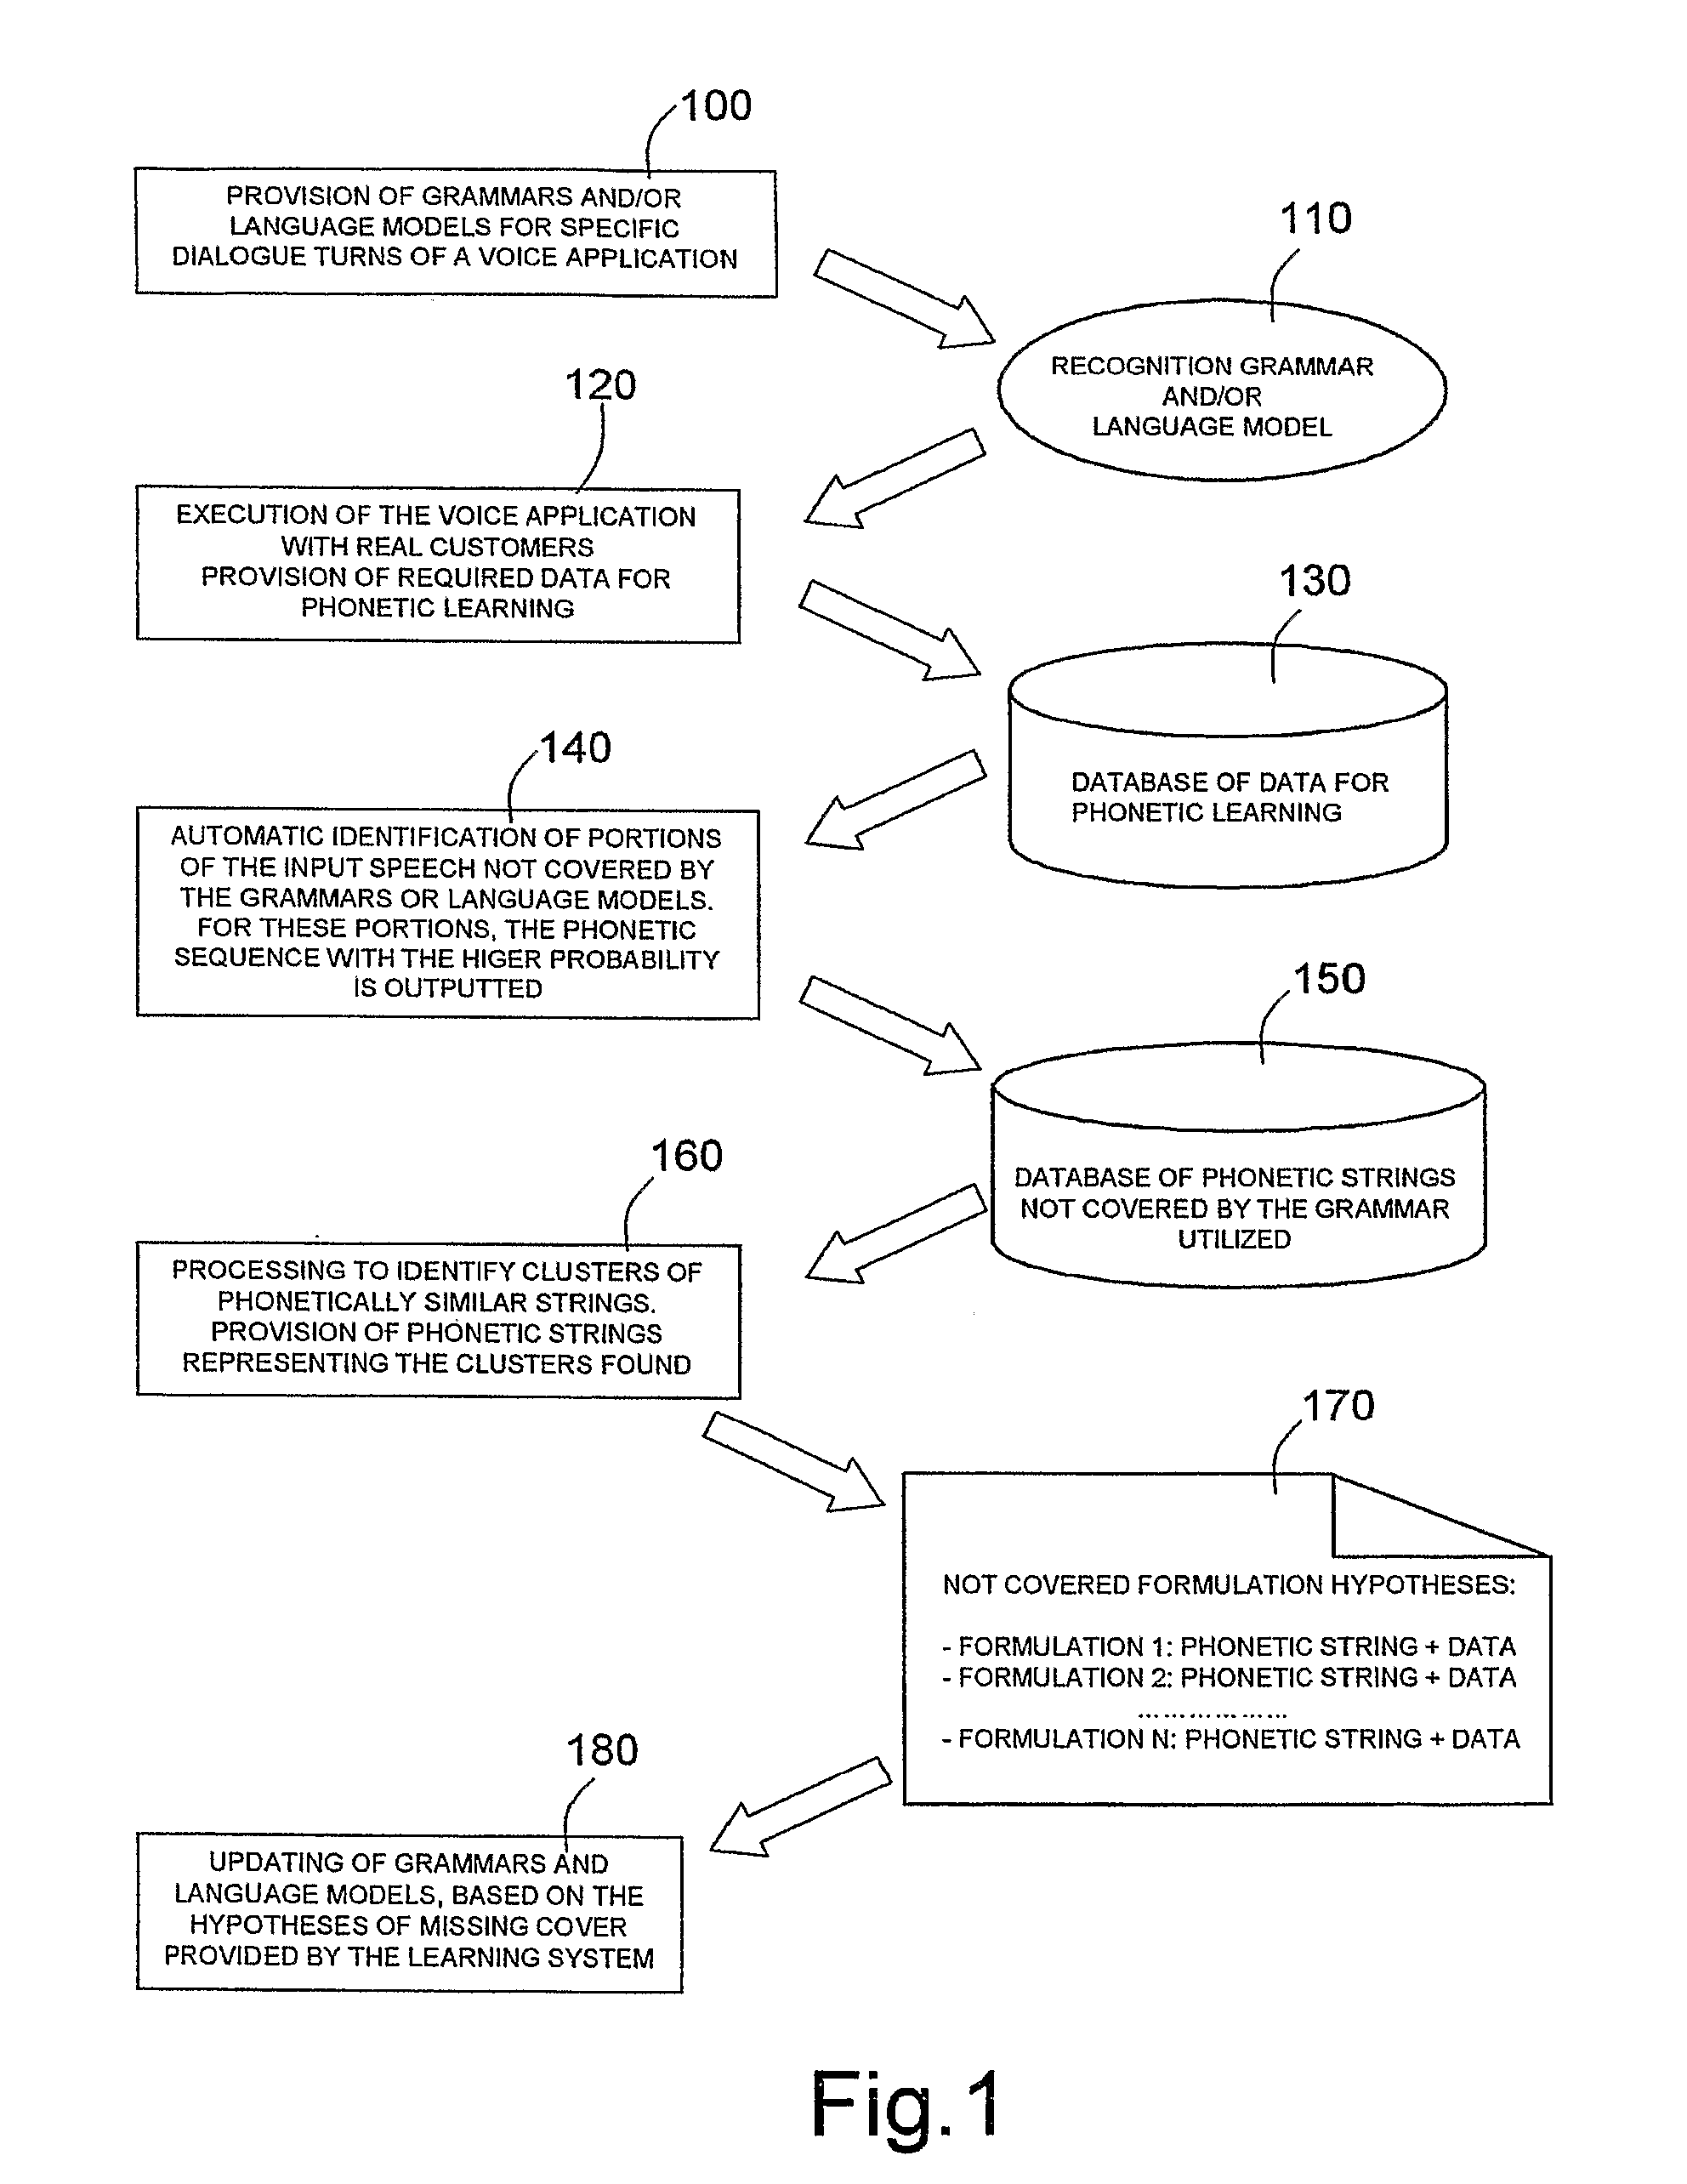 Method and System for Automatically Providing Linguistic Formulations that are Outside a Recognition Domain of an Automatic Speech Recognition System